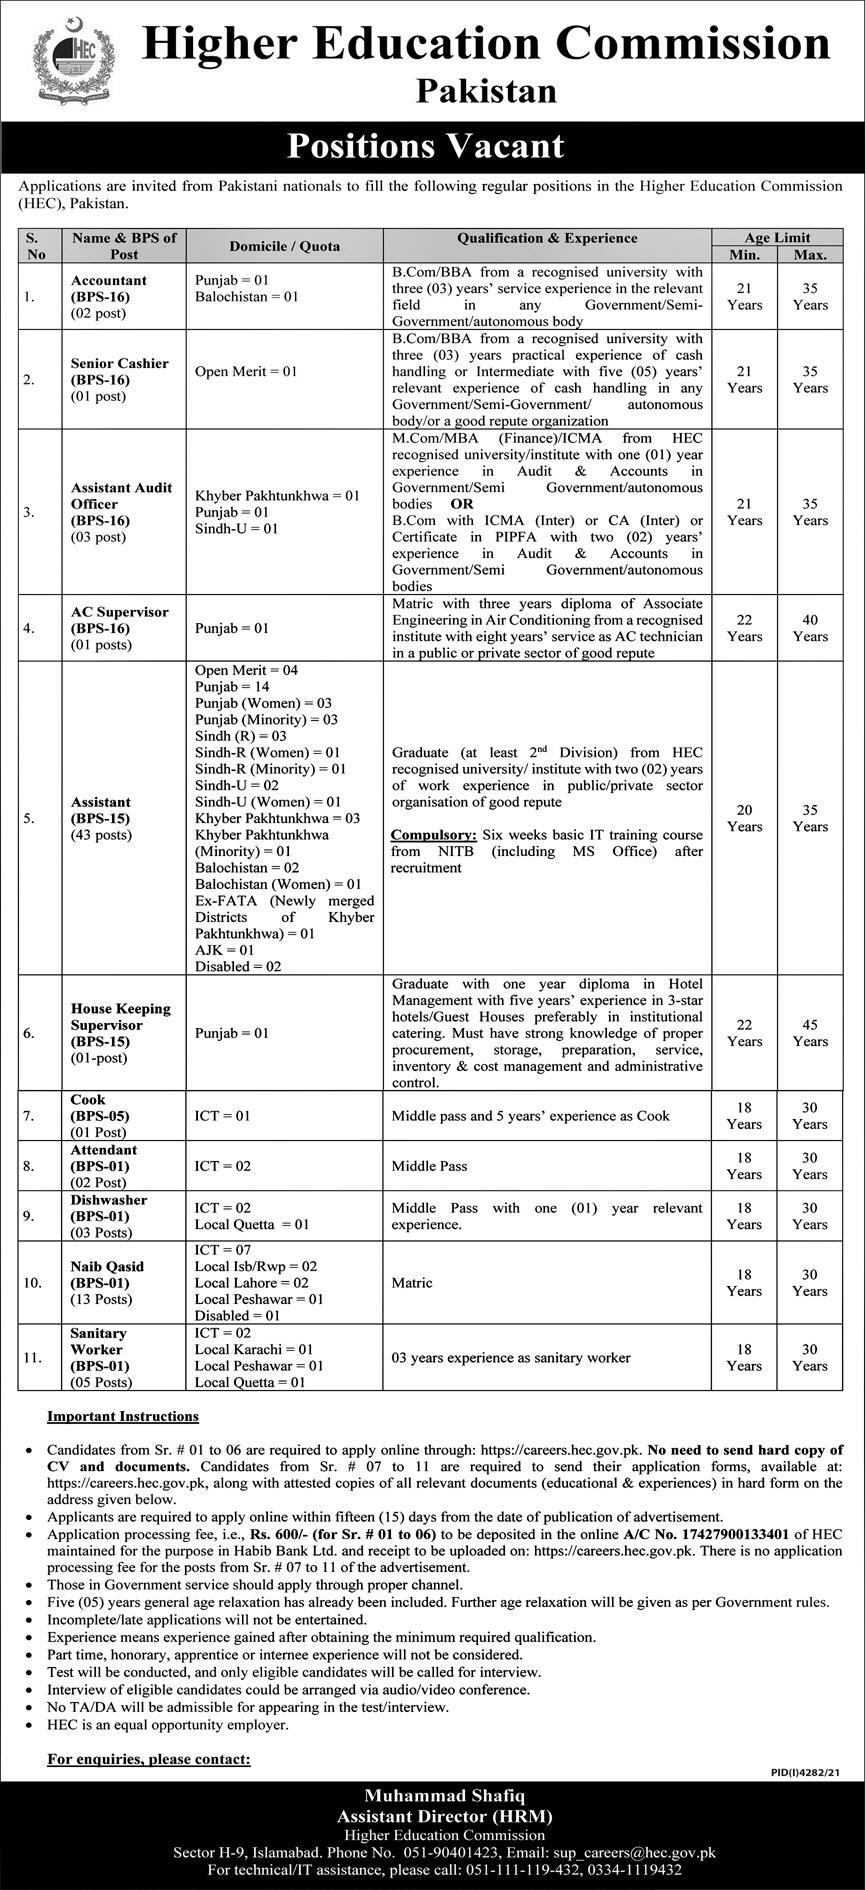 Higher Education Commission (HEC) Jobs December 2021